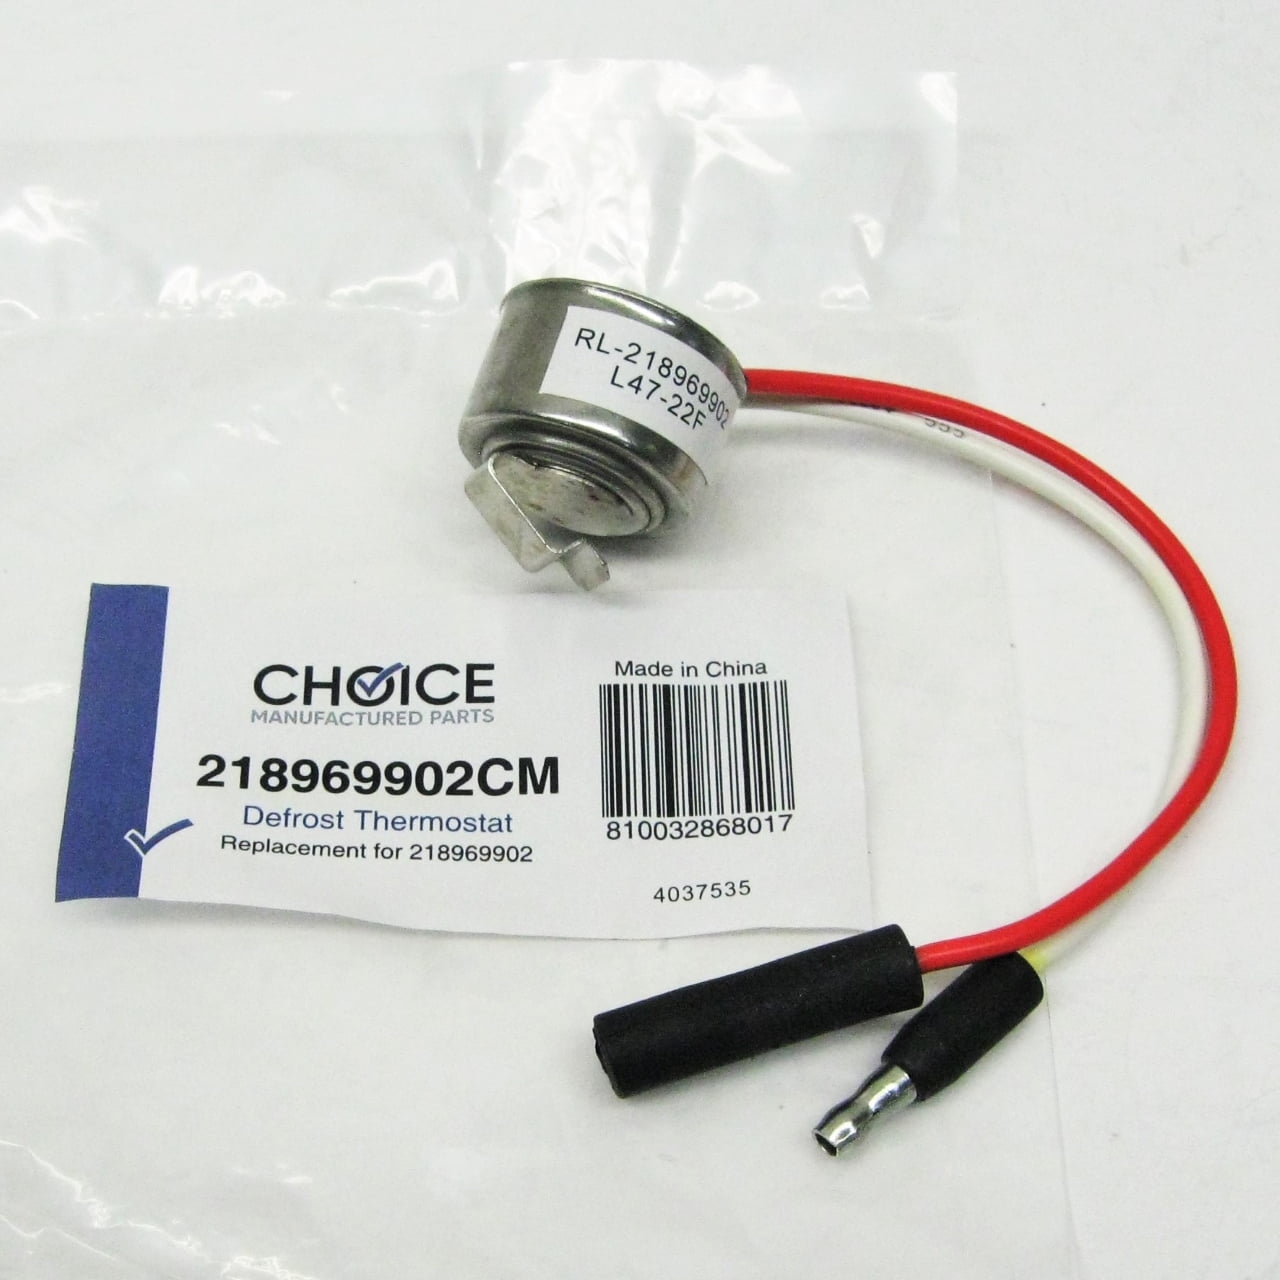 Choice 241537103 for Electrolux Frigidaire Refrigerator Cold Control Thermostat 